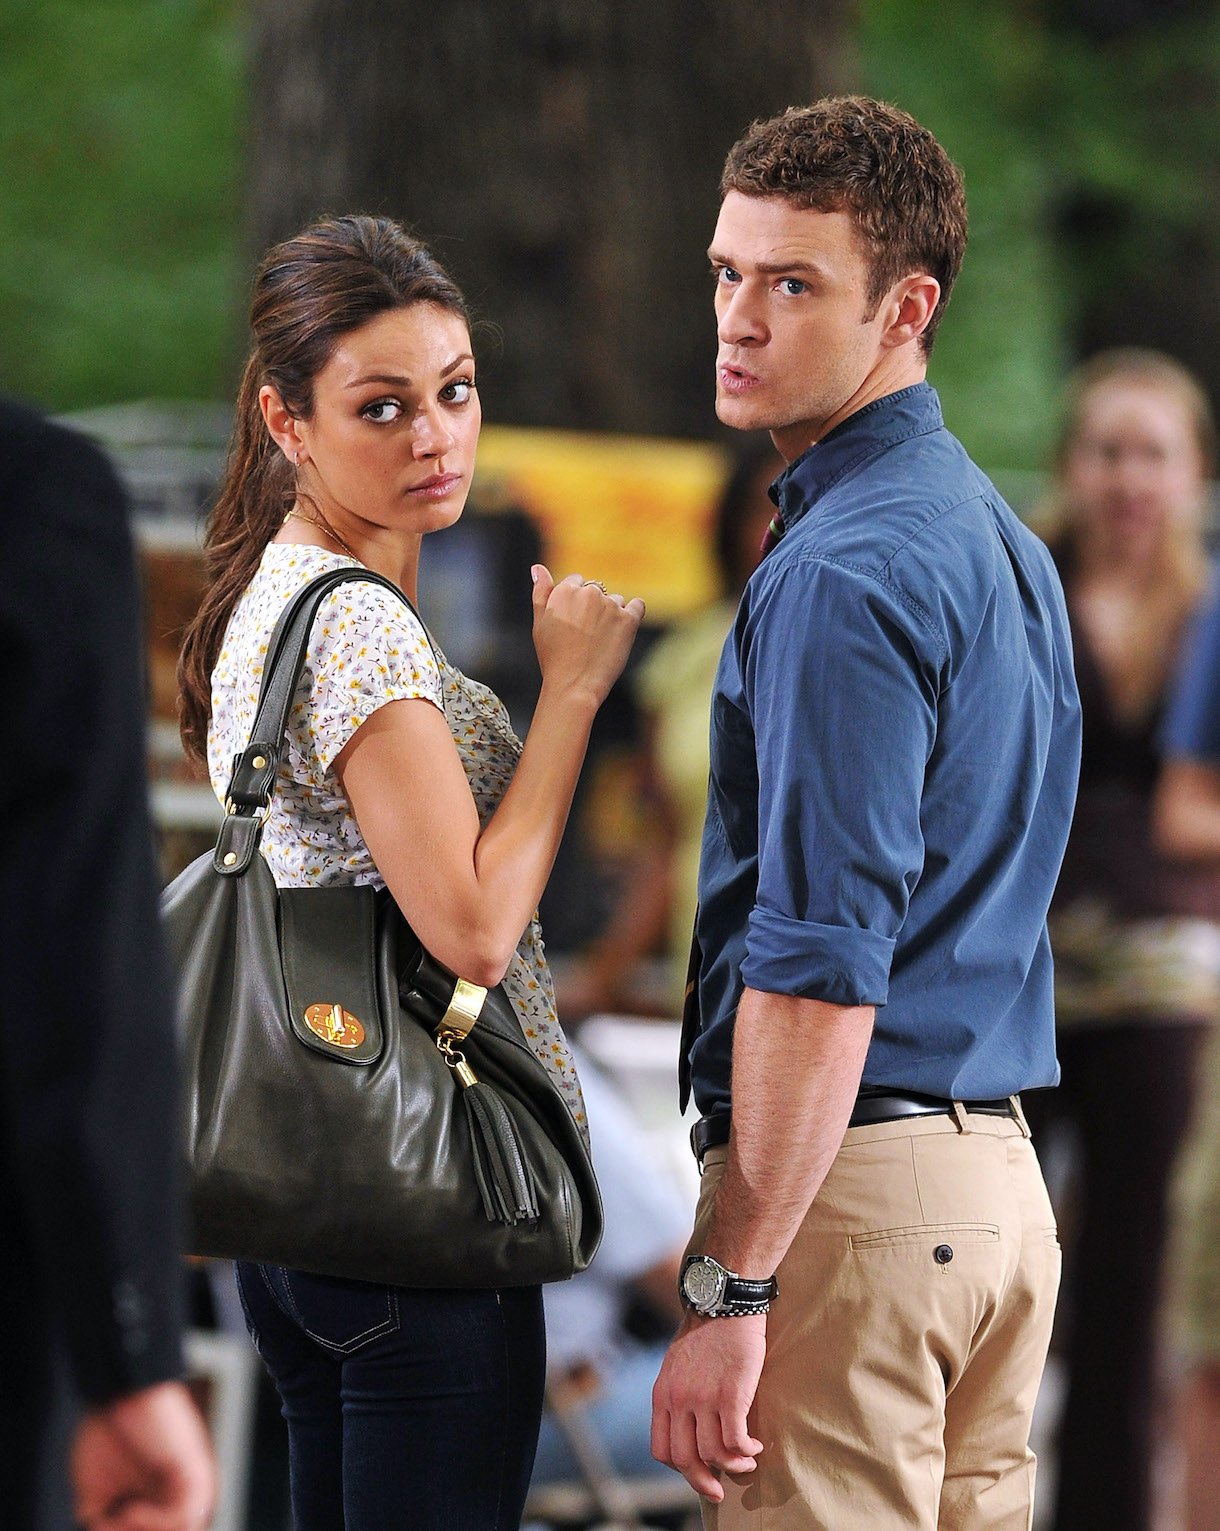 Mila Kunis and Justin Timberlake on location for 'Friends With Benefits' on 5th Avenue on July 20, 2010 in New York City